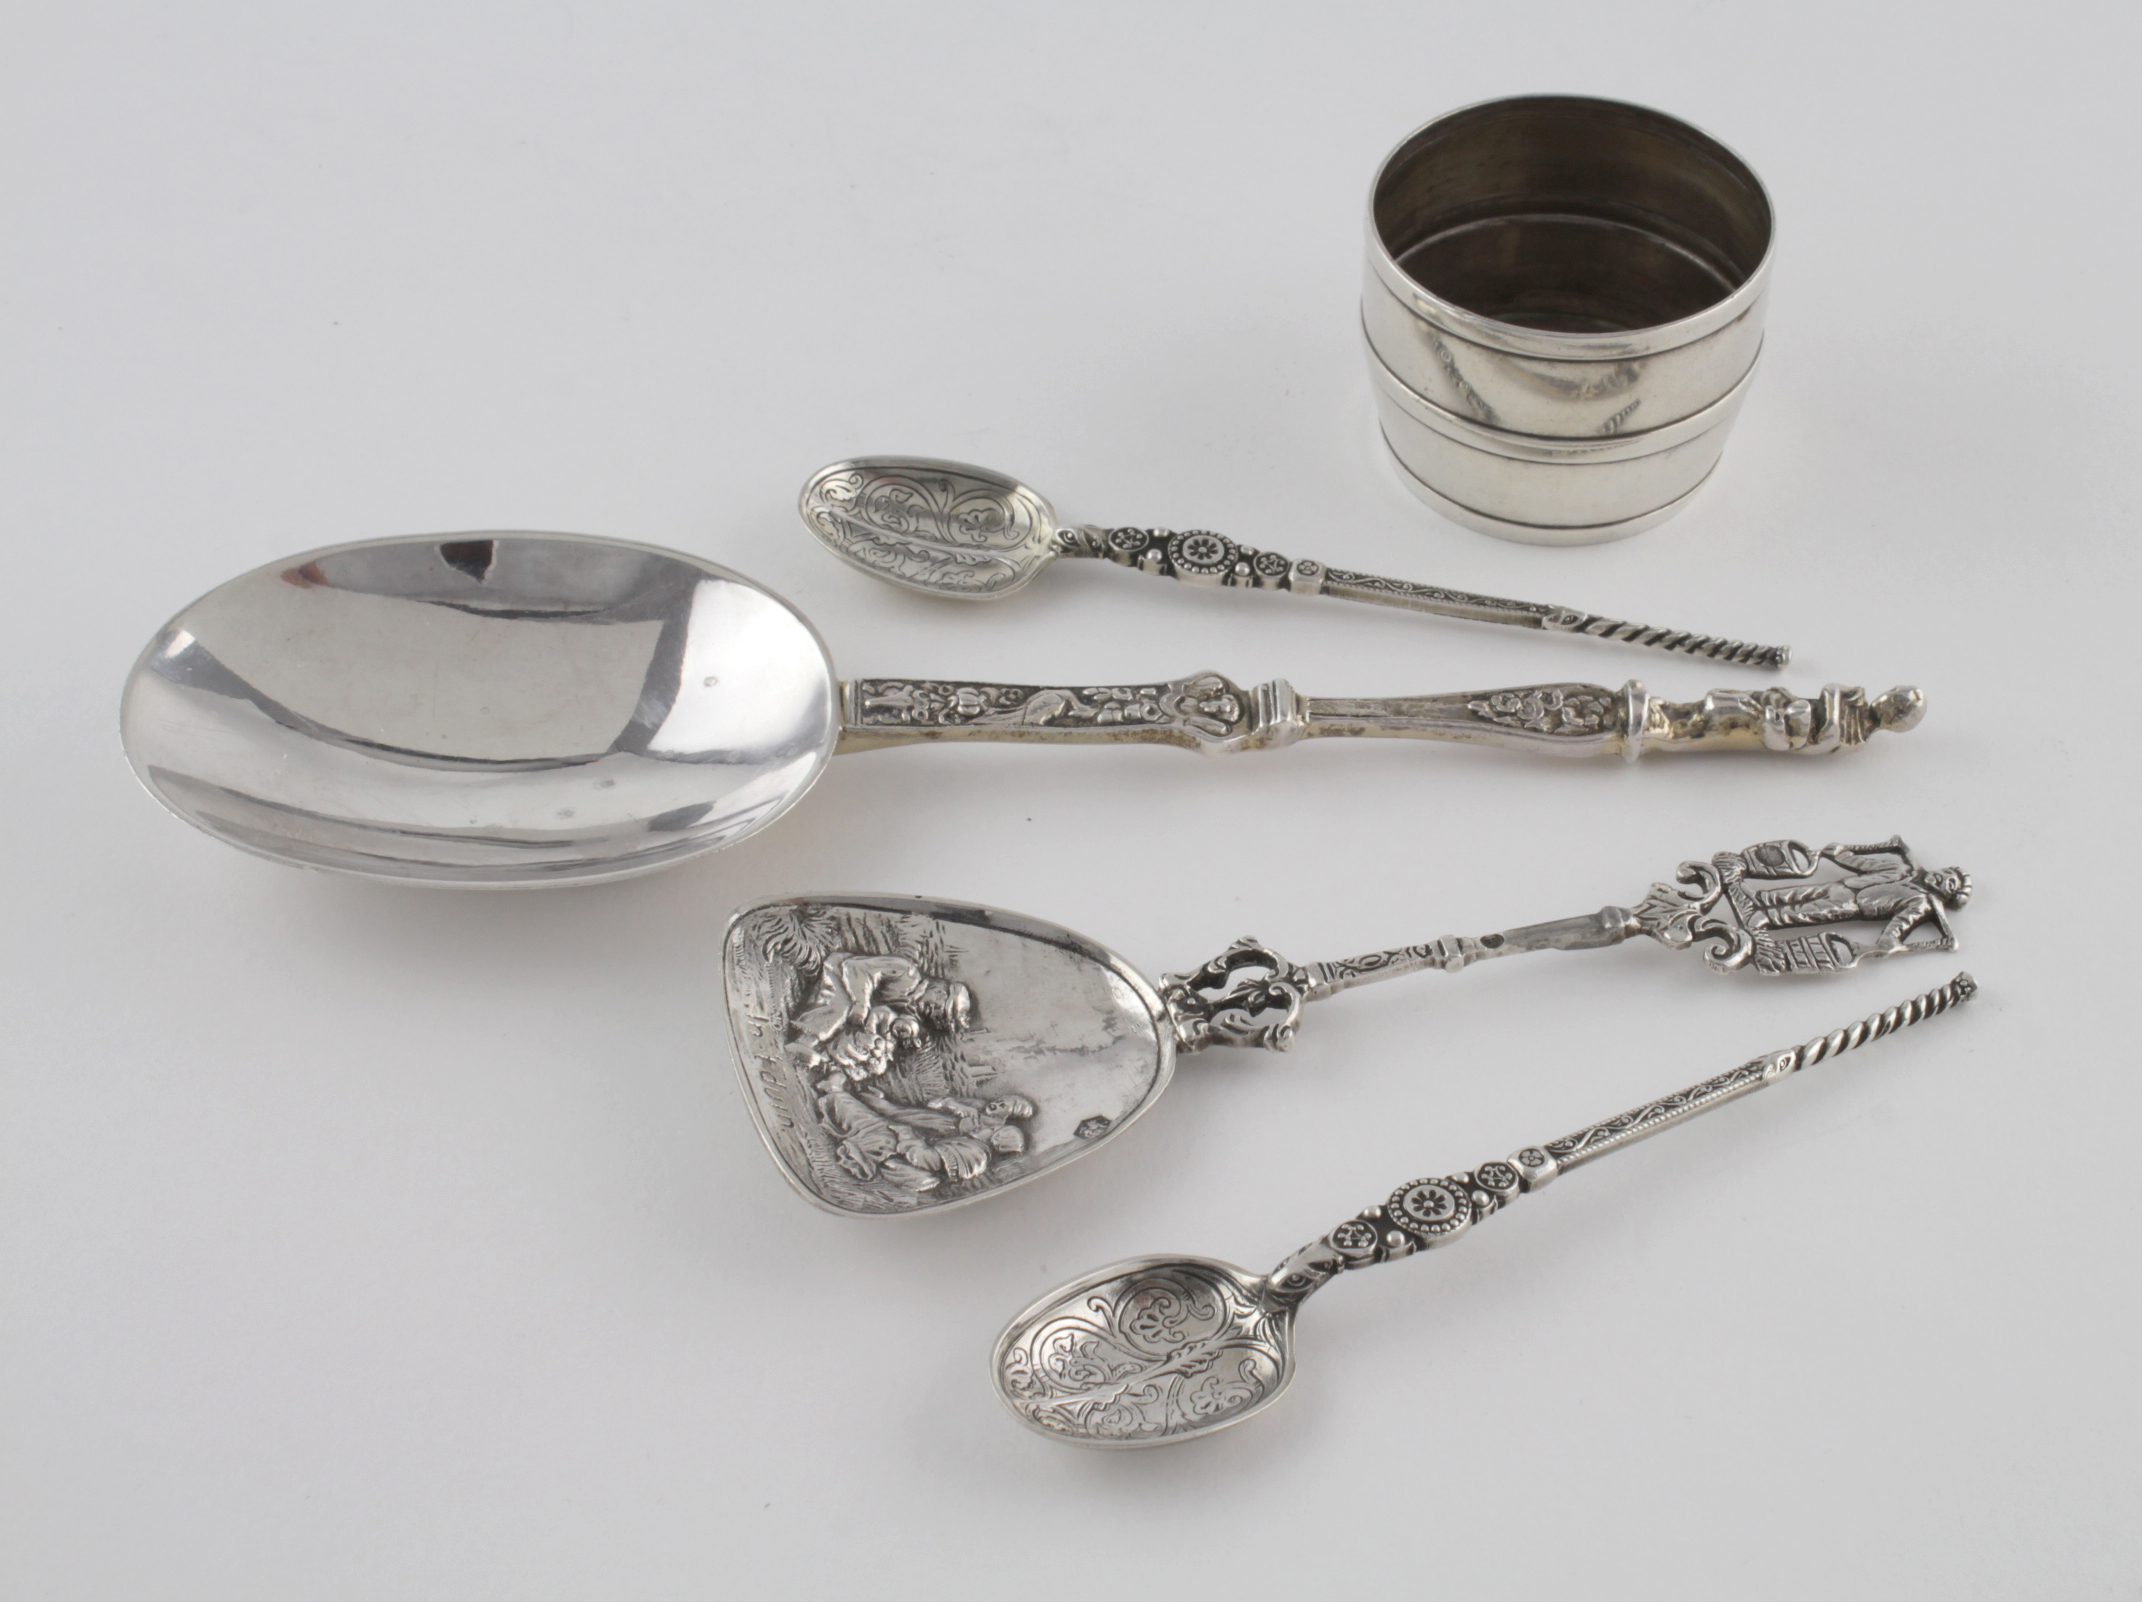 Large silver apostle spoon, hallmarked 'London 1906', length 19cm approx., together with a Dutch